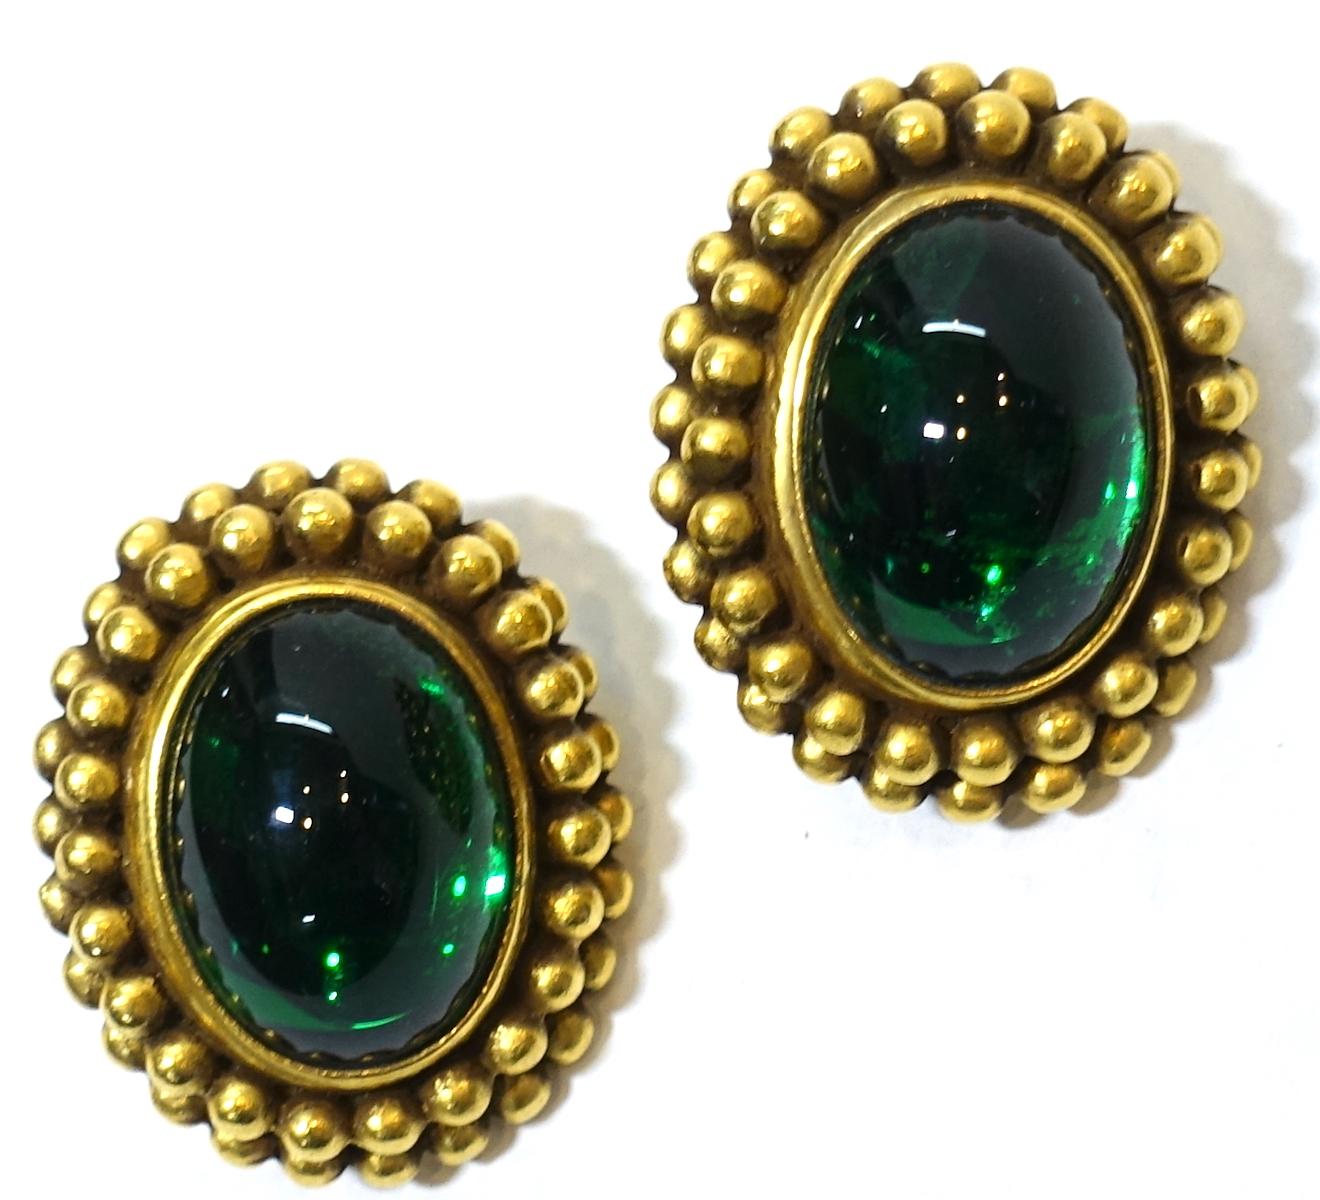 These vintage signed Yves St. Laurent earrings have a large green Gripoix glass center that is bezel in a ribbed gold tone border.  These clip earrings measure 1-1/4” x 1” and are signed “YSL”.  They are in excellent condition.